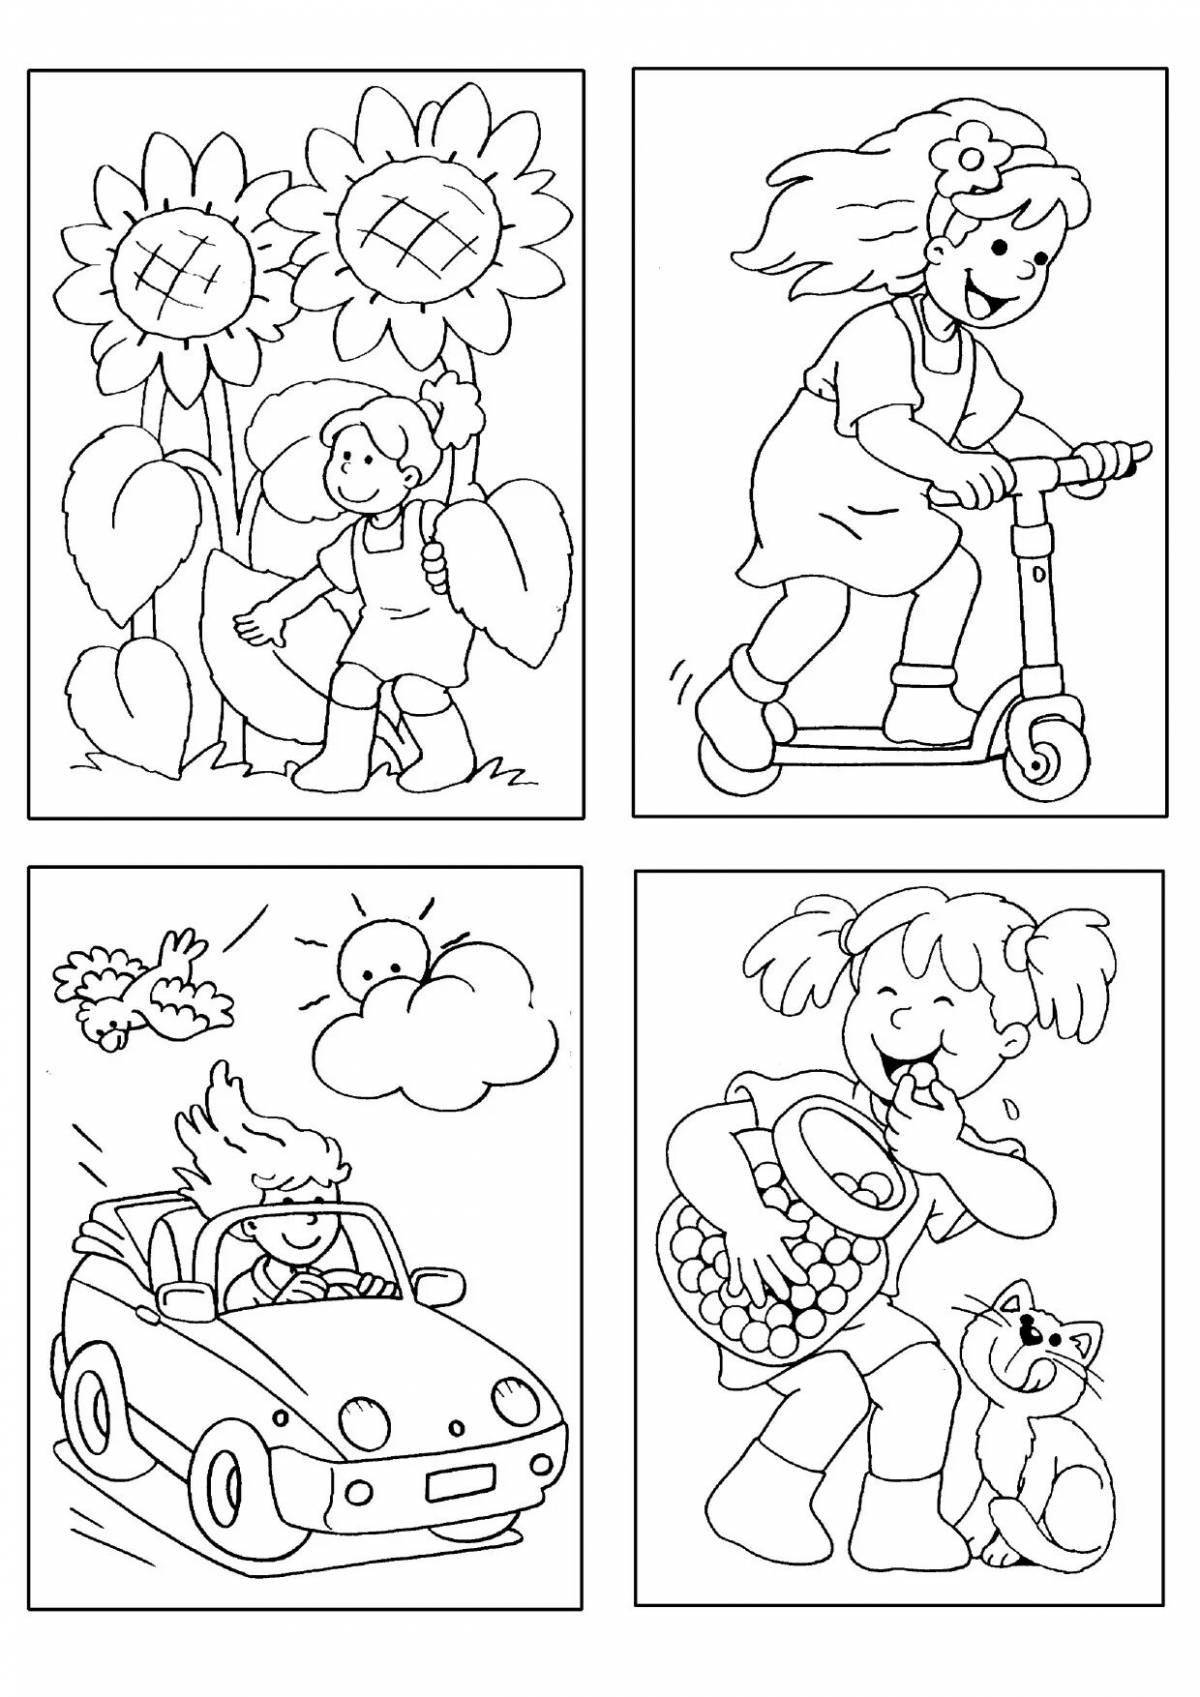 4-part color-mania coloring page